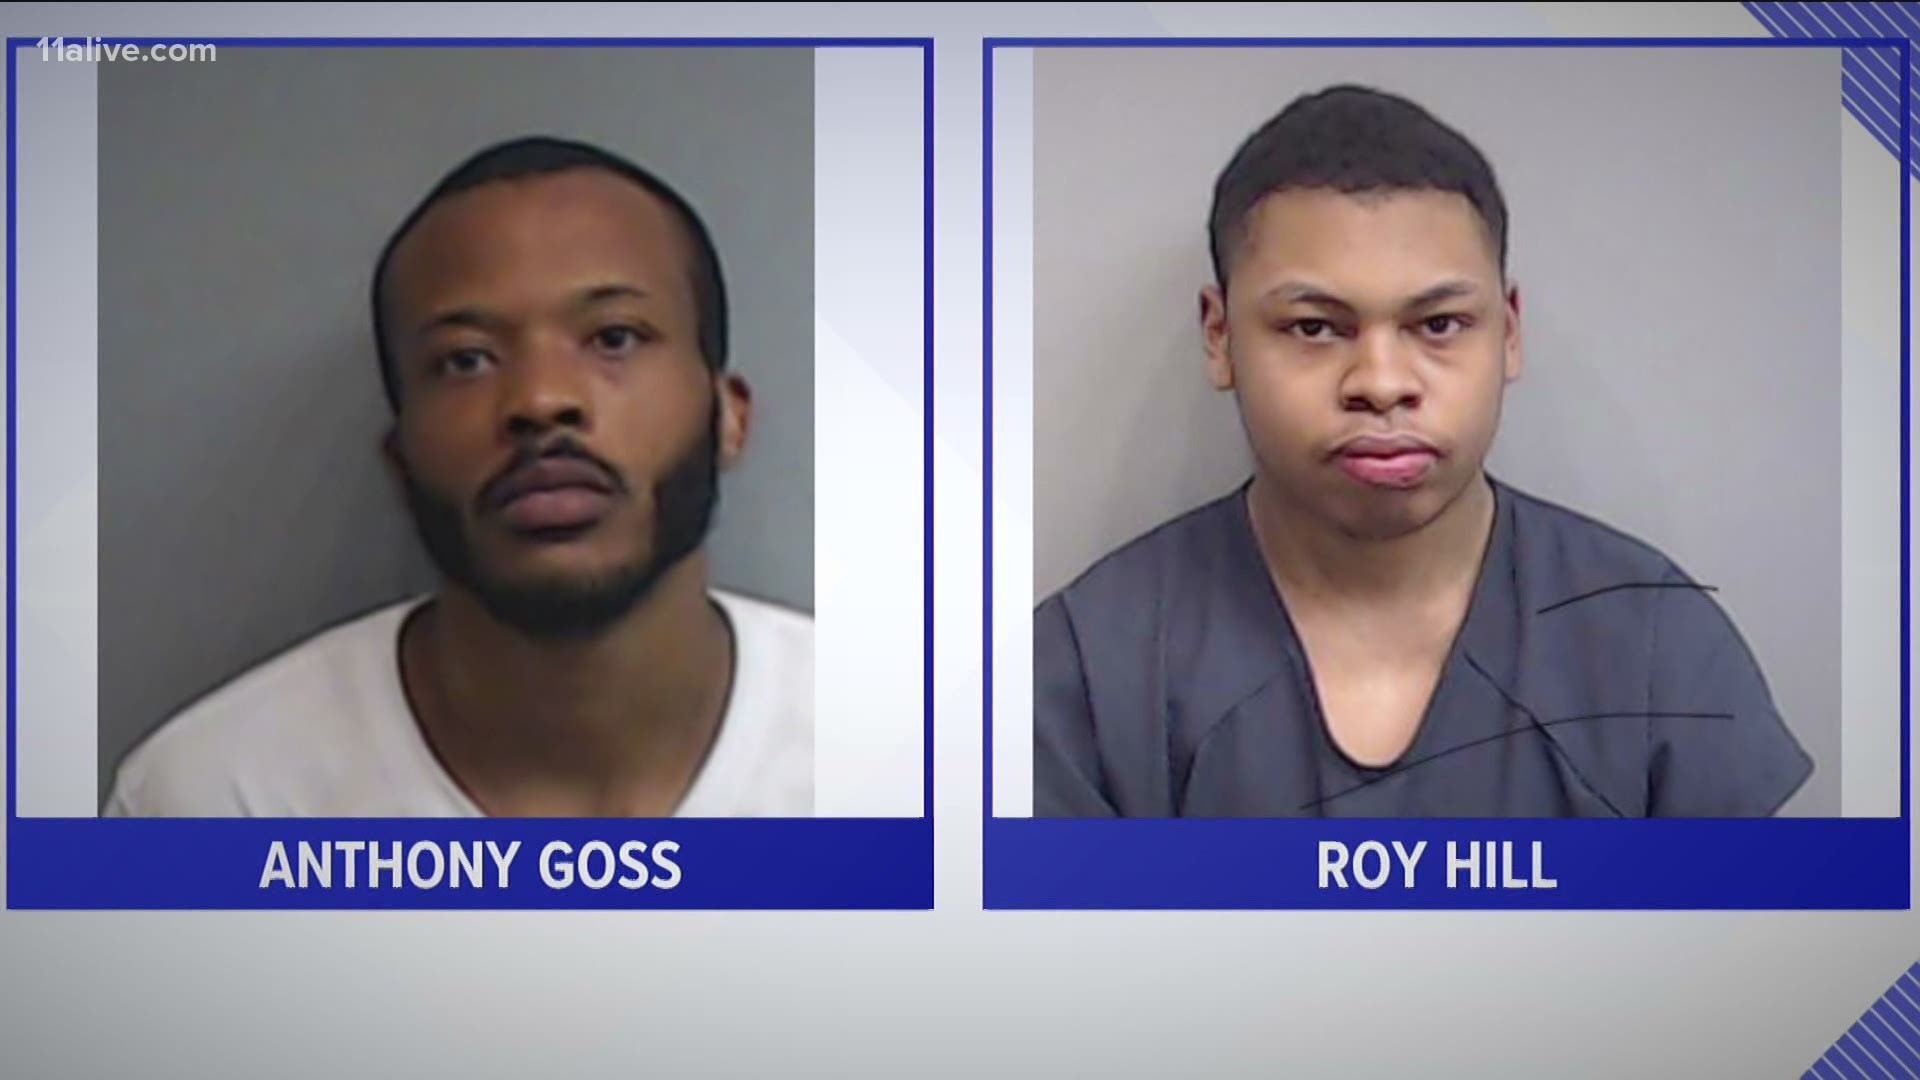 The two men facing charges were also linked to the 2019 murder of a college student